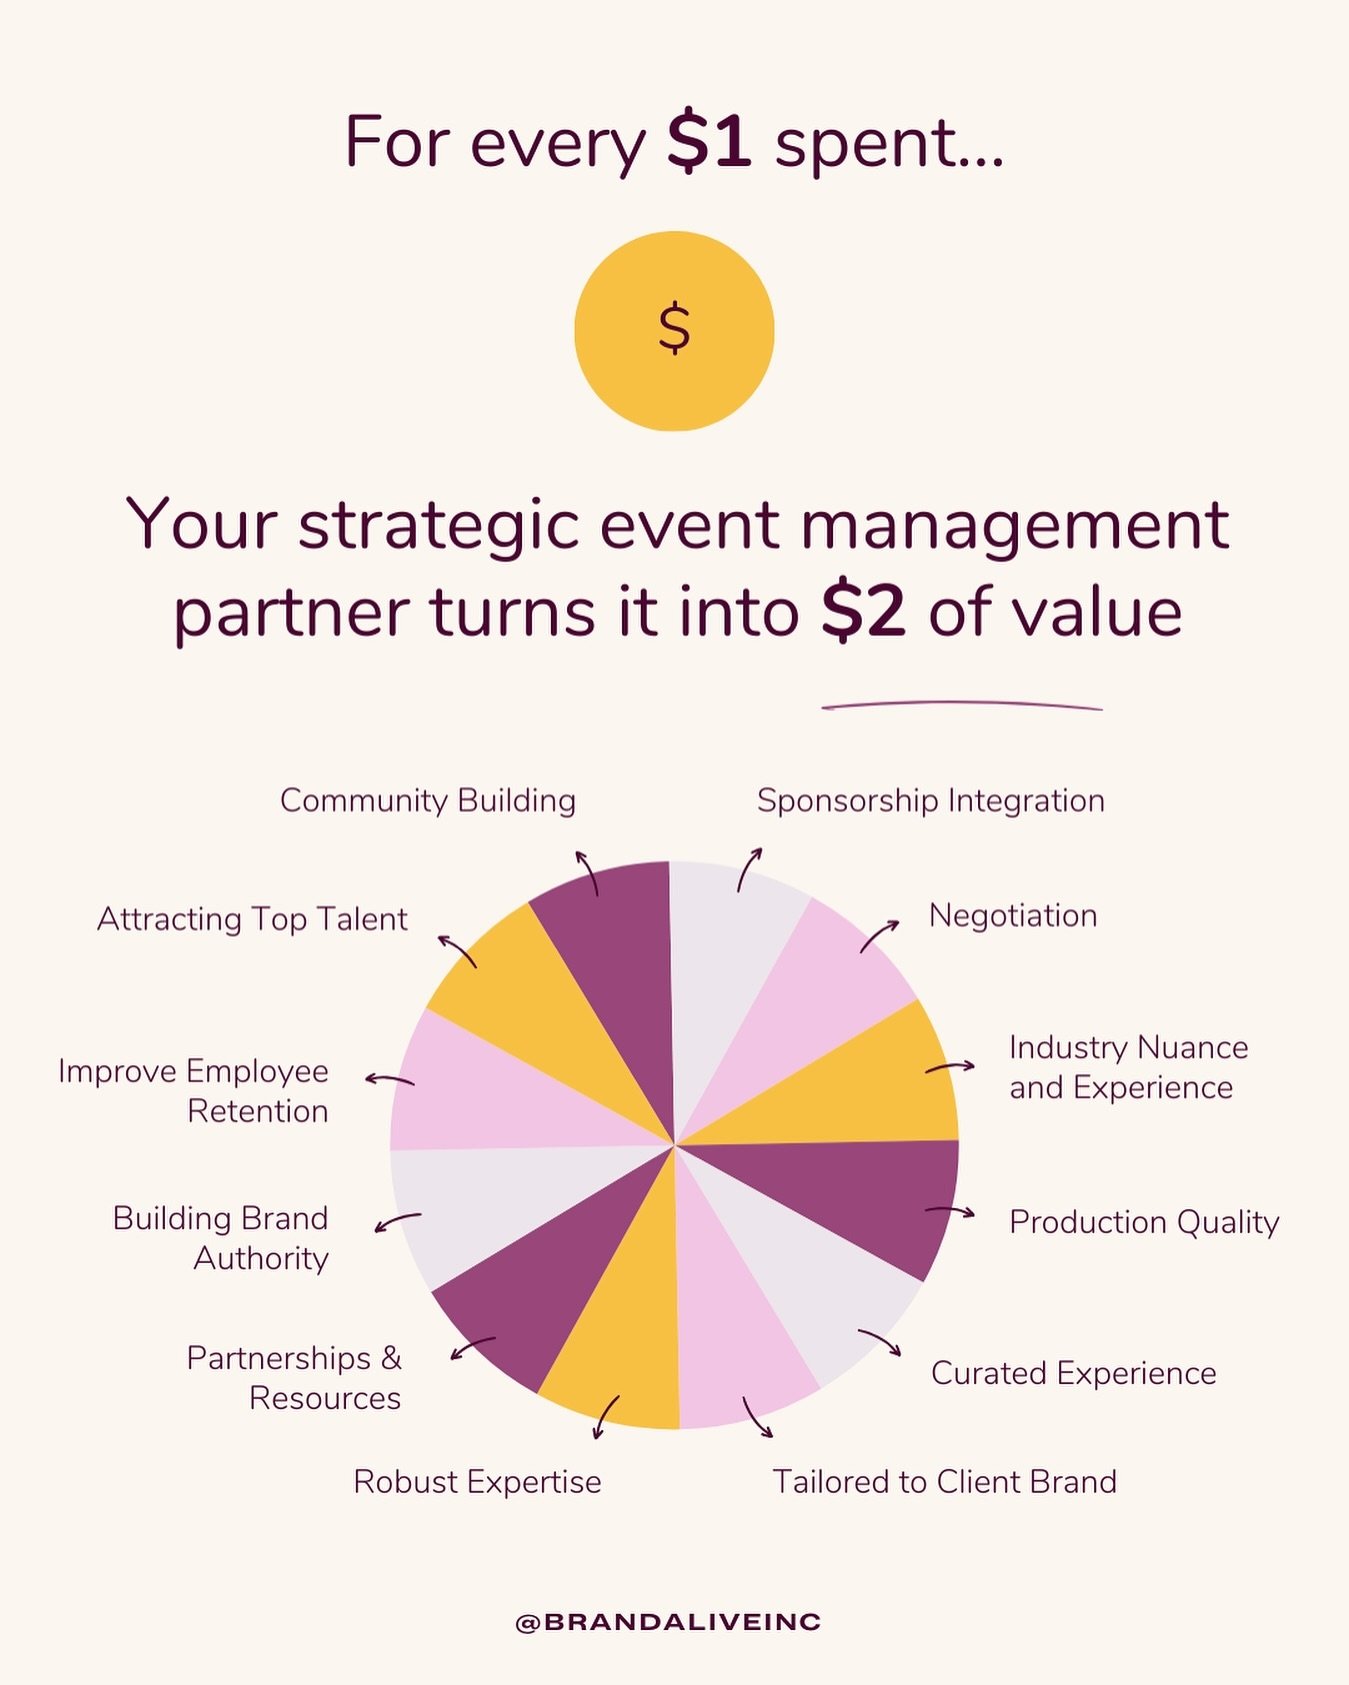 Let&rsquo;s talk dollars and cents... 💸⁠
⁠
Your strategic event management partner turns every $1 spend on an event, into $2+ of value, for an ROI of over 100%. Here&rsquo;s how: ⁠
⁠
Imagine your event budget. It lists proposed expenses that match t